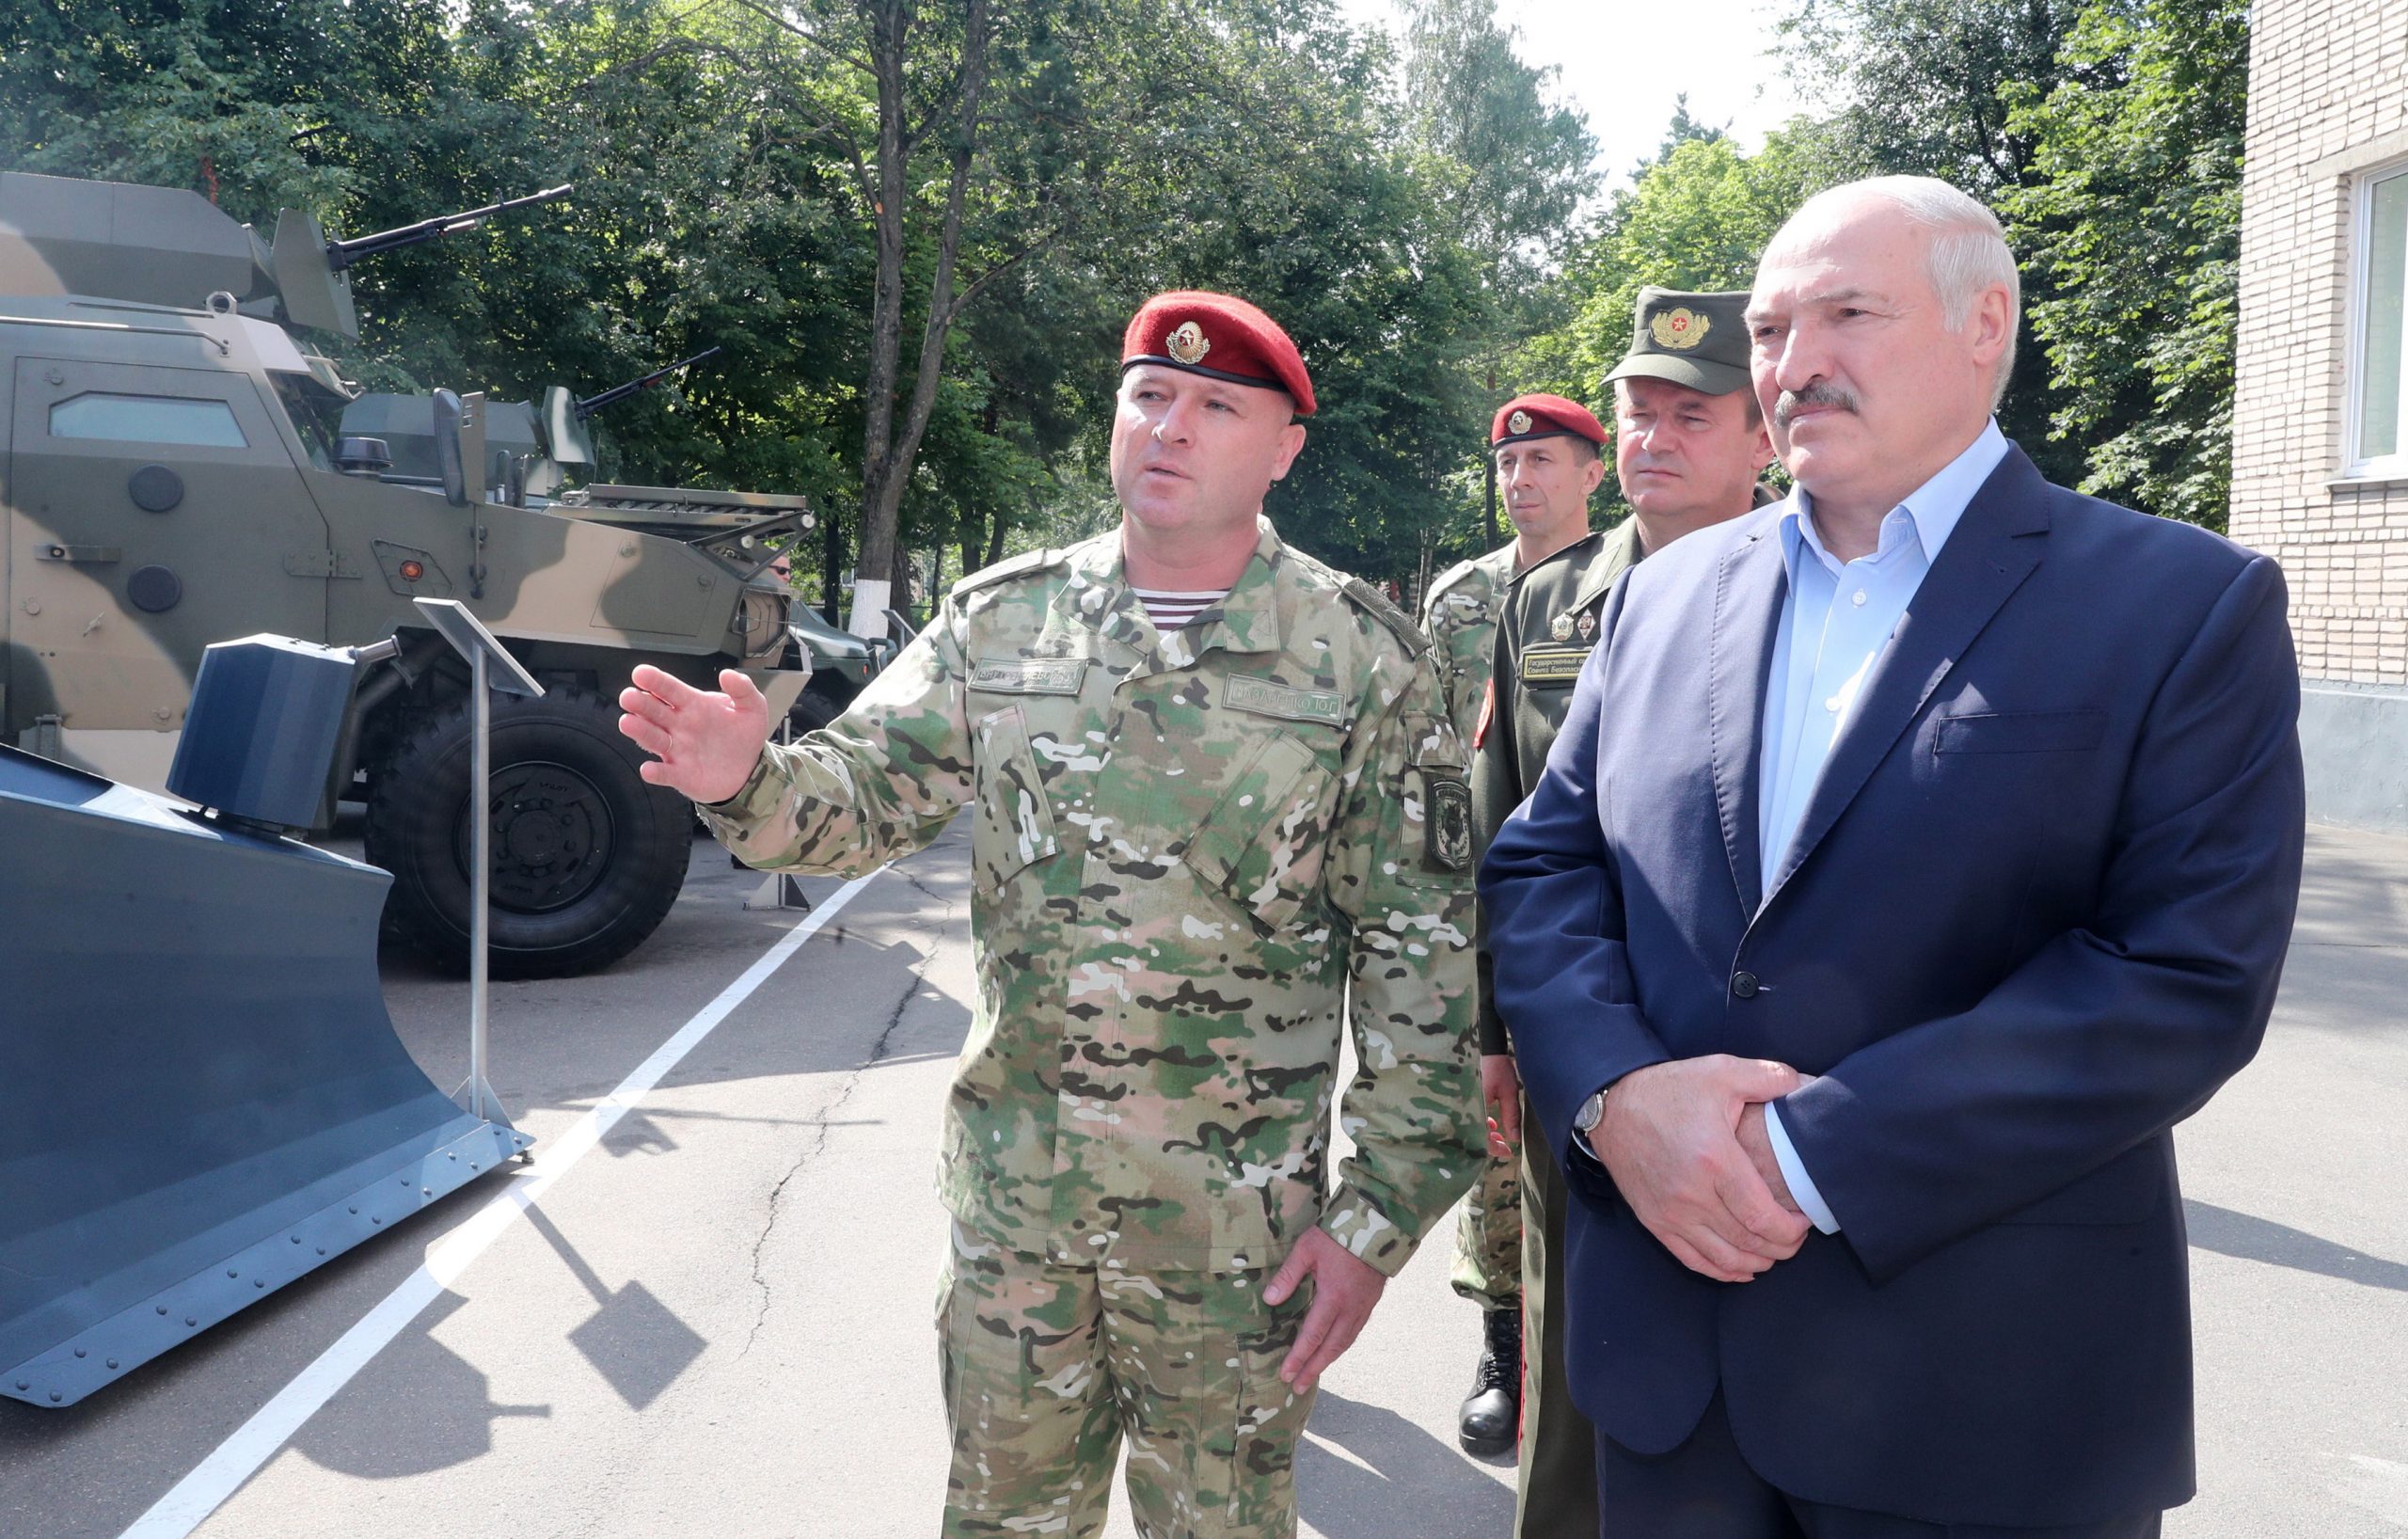 epa08570378 Belarus President Alexander Lukashenko (R) speaks with officers as he visits the Belarusian Interior Ministry special forces base in Minsk, Belarus, 28 July 2020. The presidential election in Belarus is scheduled to take place on 09 August 2020.  EPA/NIKOLAI PETROV  / POOL